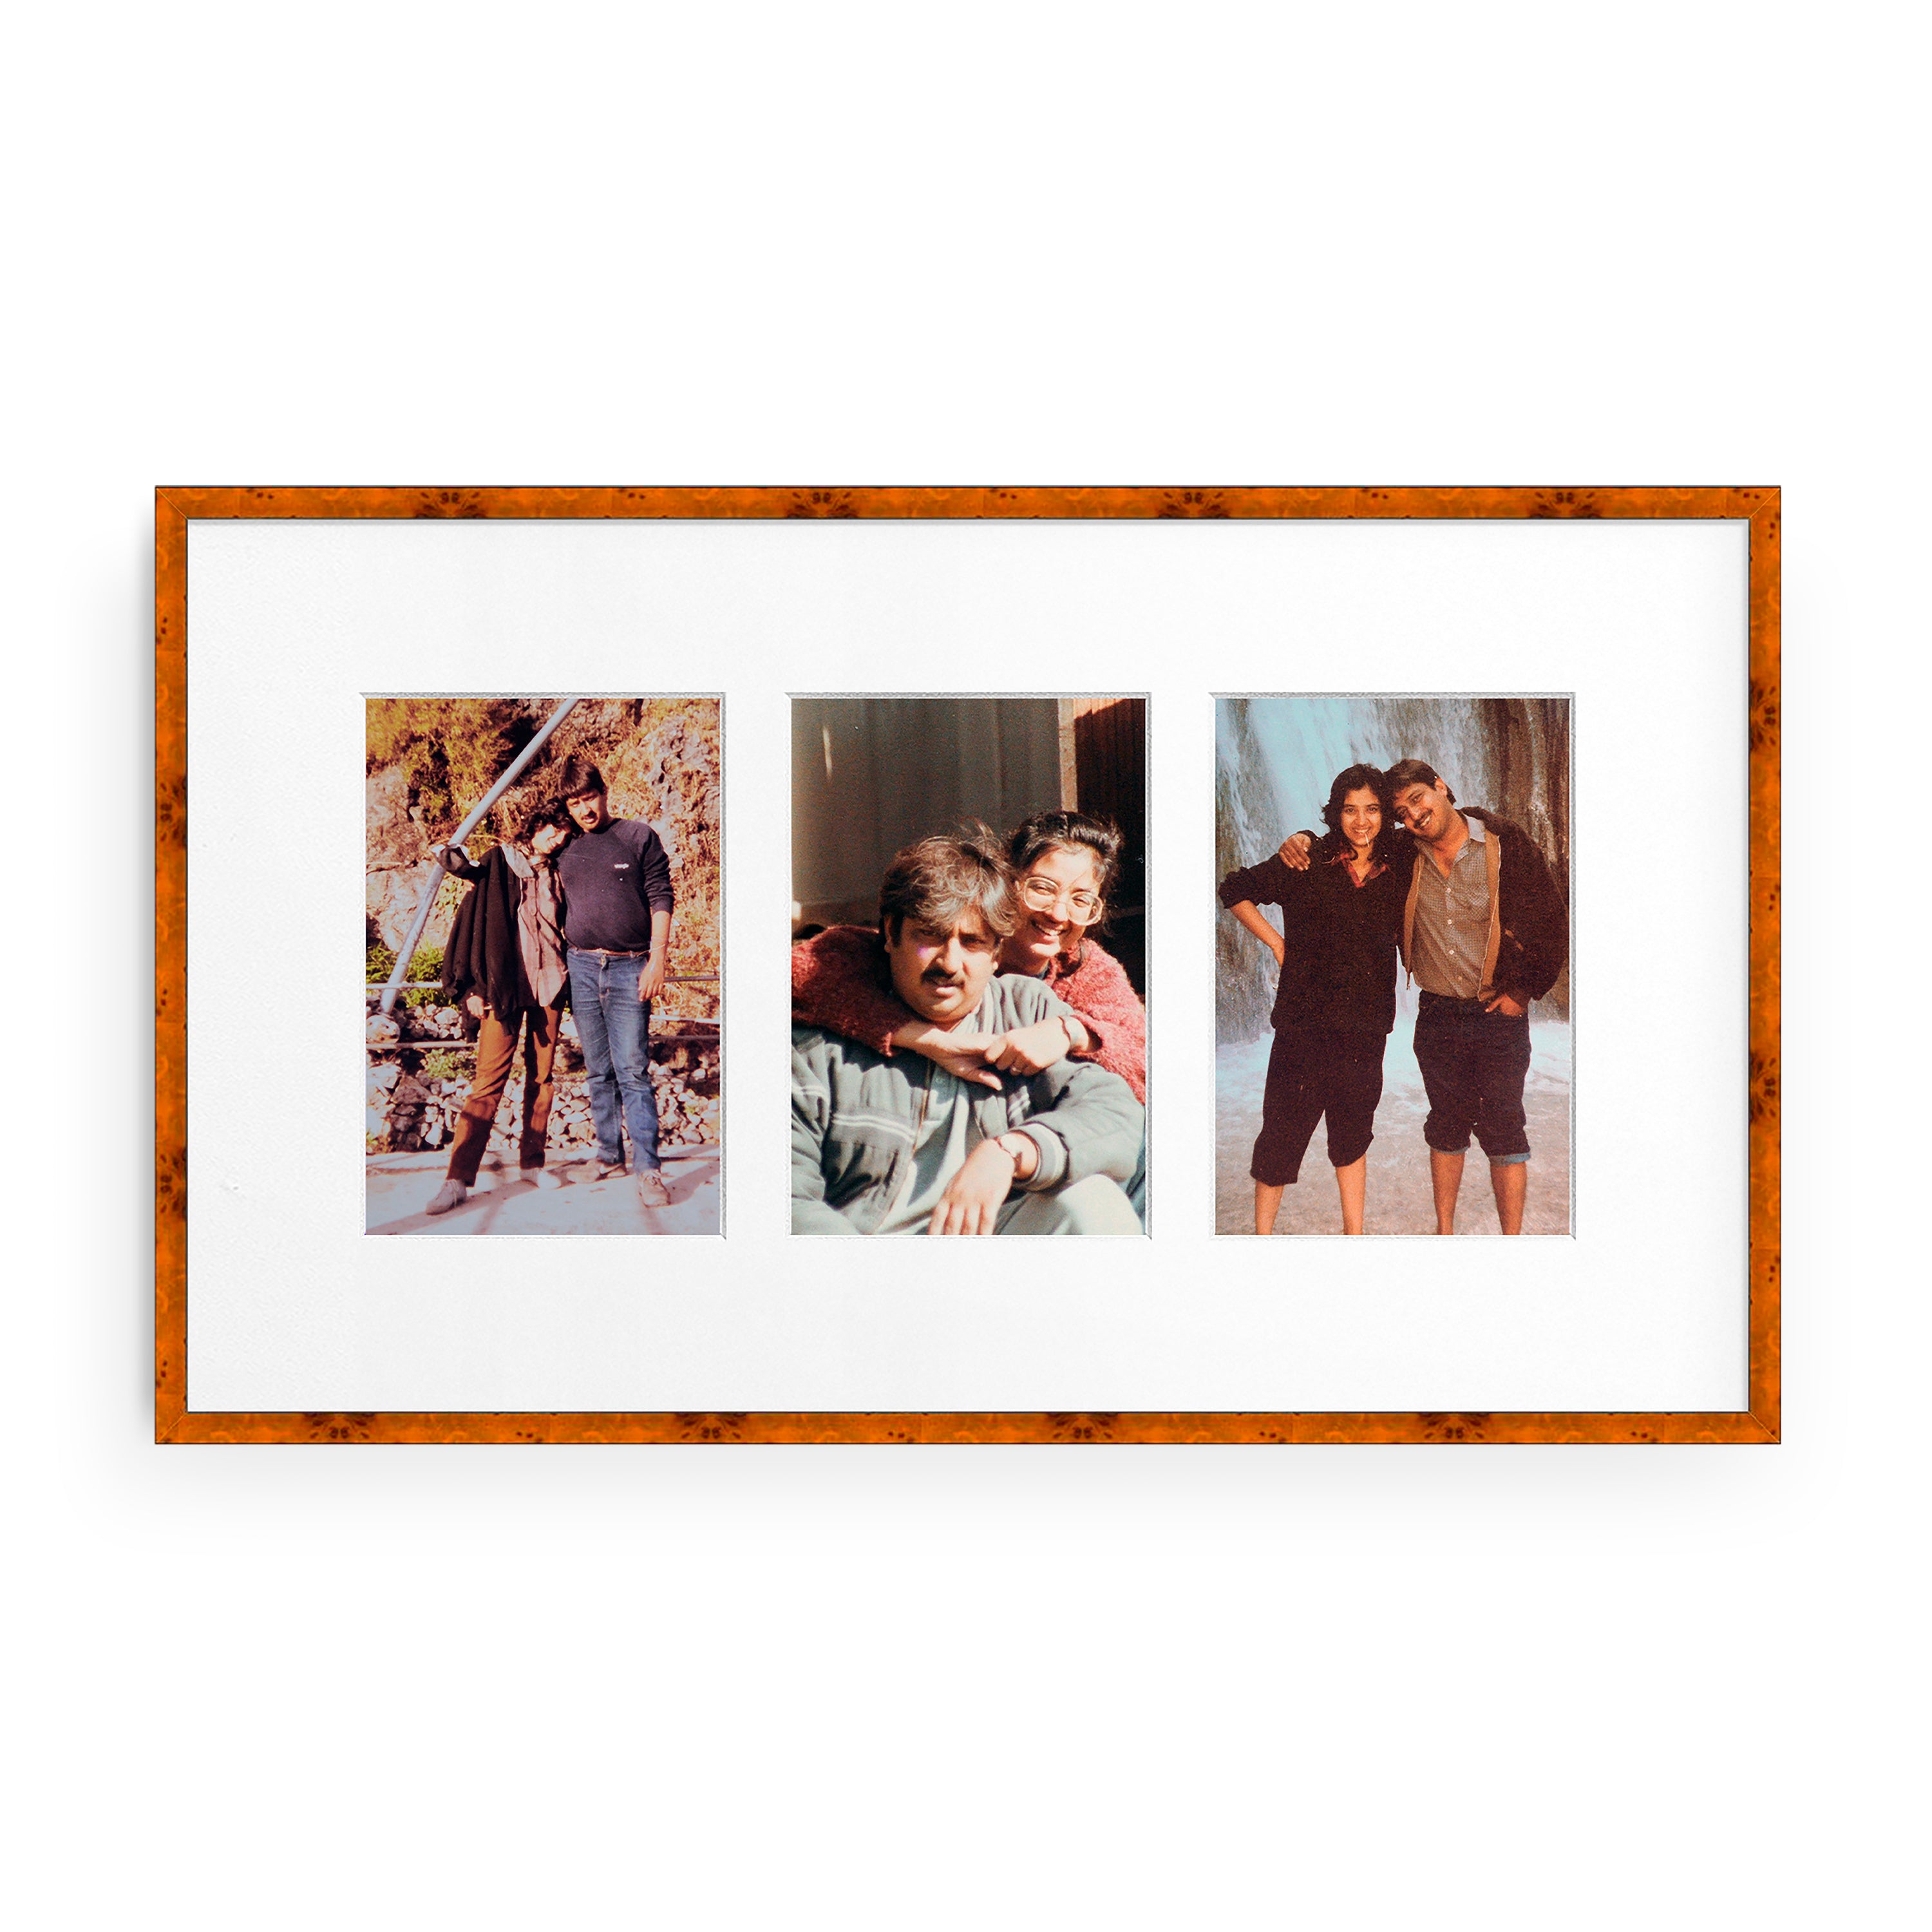 Trio Collage Frame - White, 4x6  Display 3 Photos in 1 Picture Frame